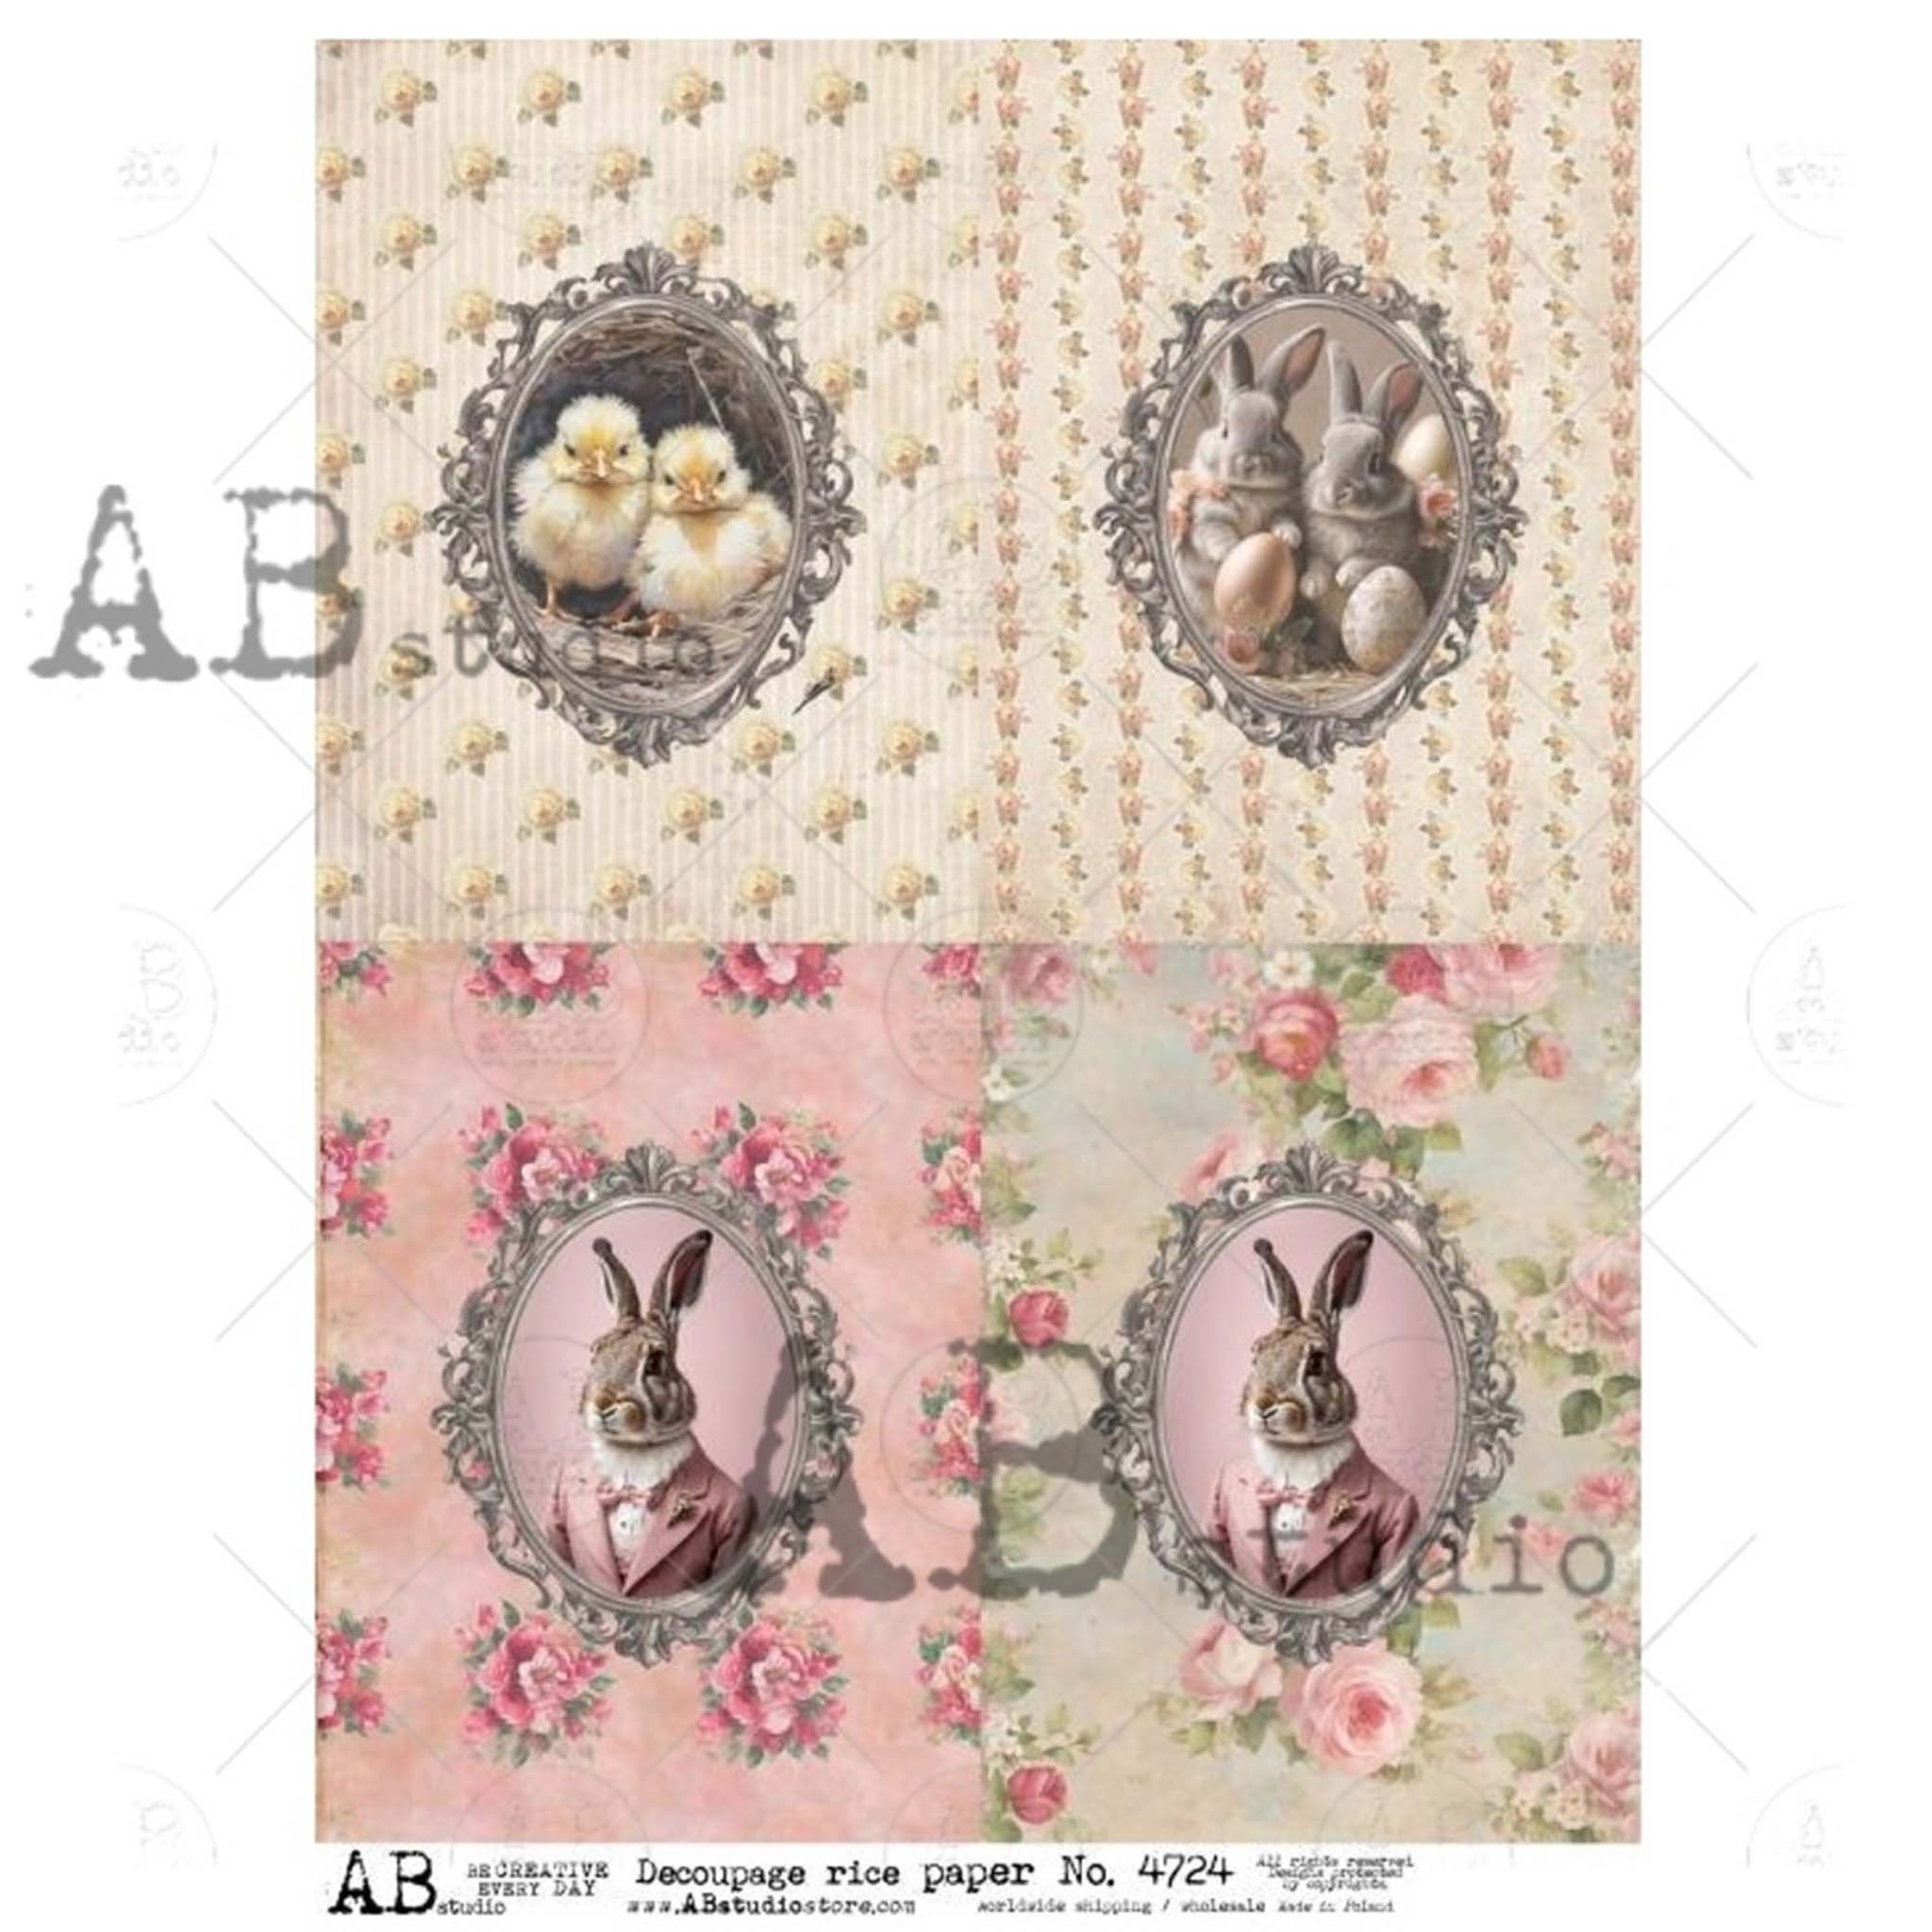 A4 rice paper design features charming designs of baby chicks, bunnies, and a rabbit in a suit against floral wallpaper. White borders are on the sides.